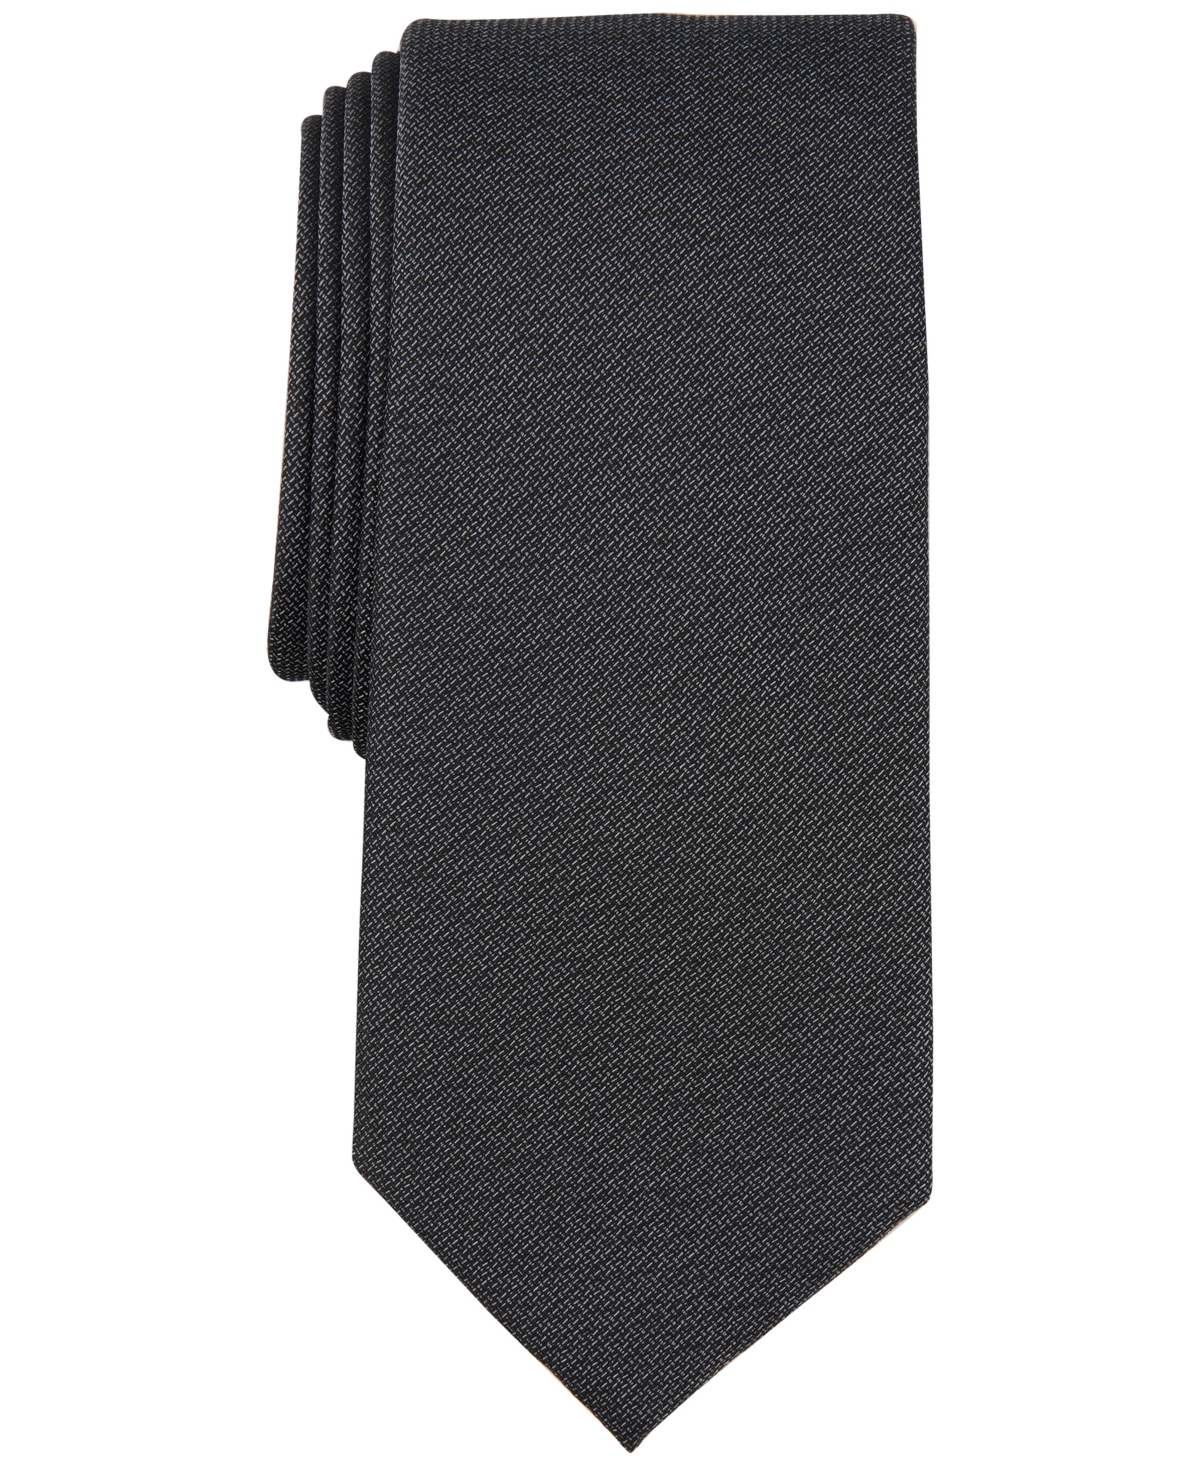 Men's Roseau Solid Tie, Created for Macy's - Grey